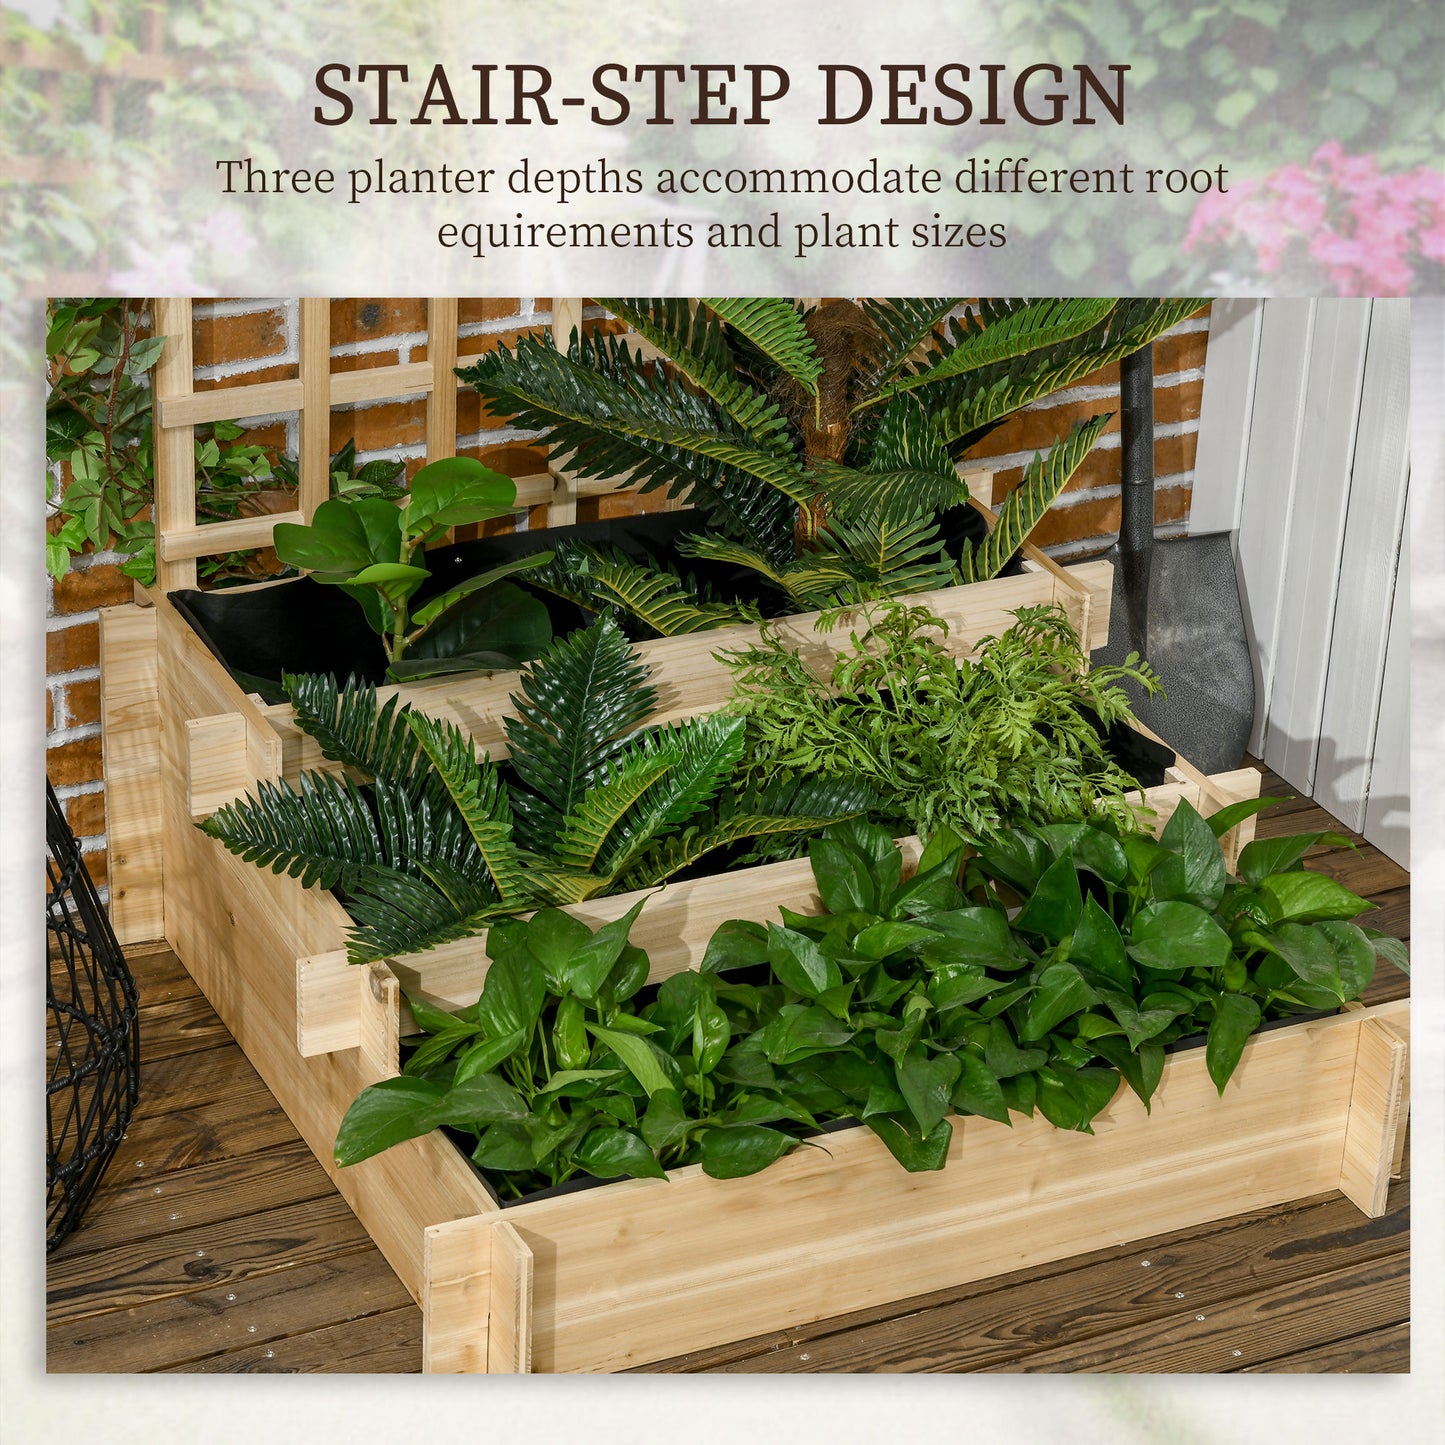 Outsunny 3 Tier Garden Planters with Trellis for Vine Climbing, Wooden Raised Beds, 95x95x110cm, Natural Tone